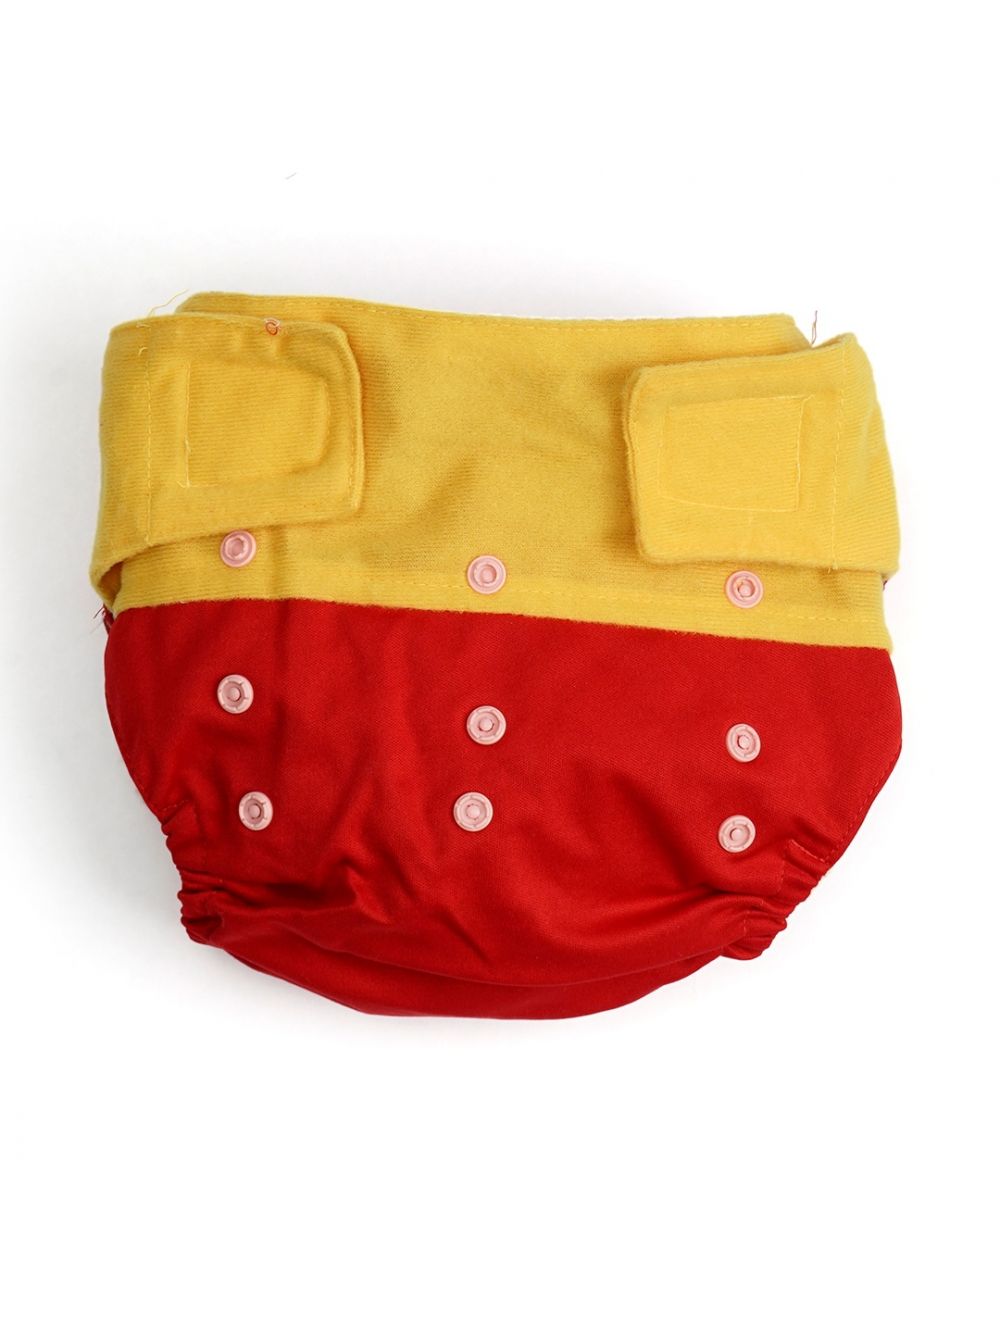 Cuby Baby Reusable Nappy Yellow & Red